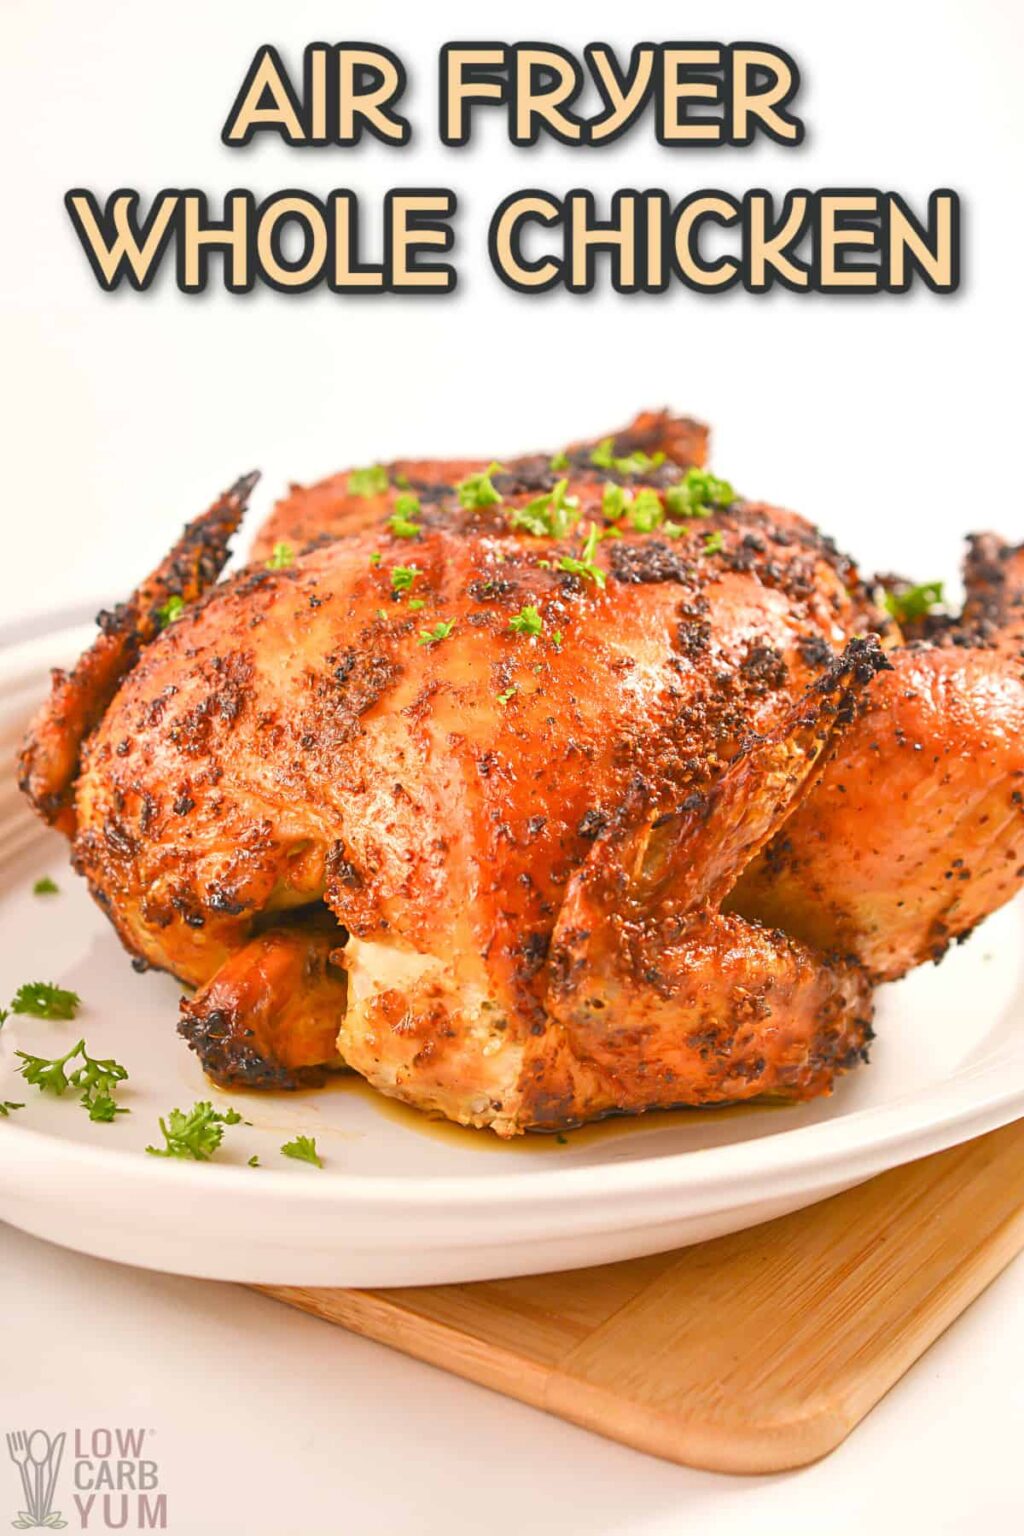 Air Fryer Whole Chicken - Low Carb Yum